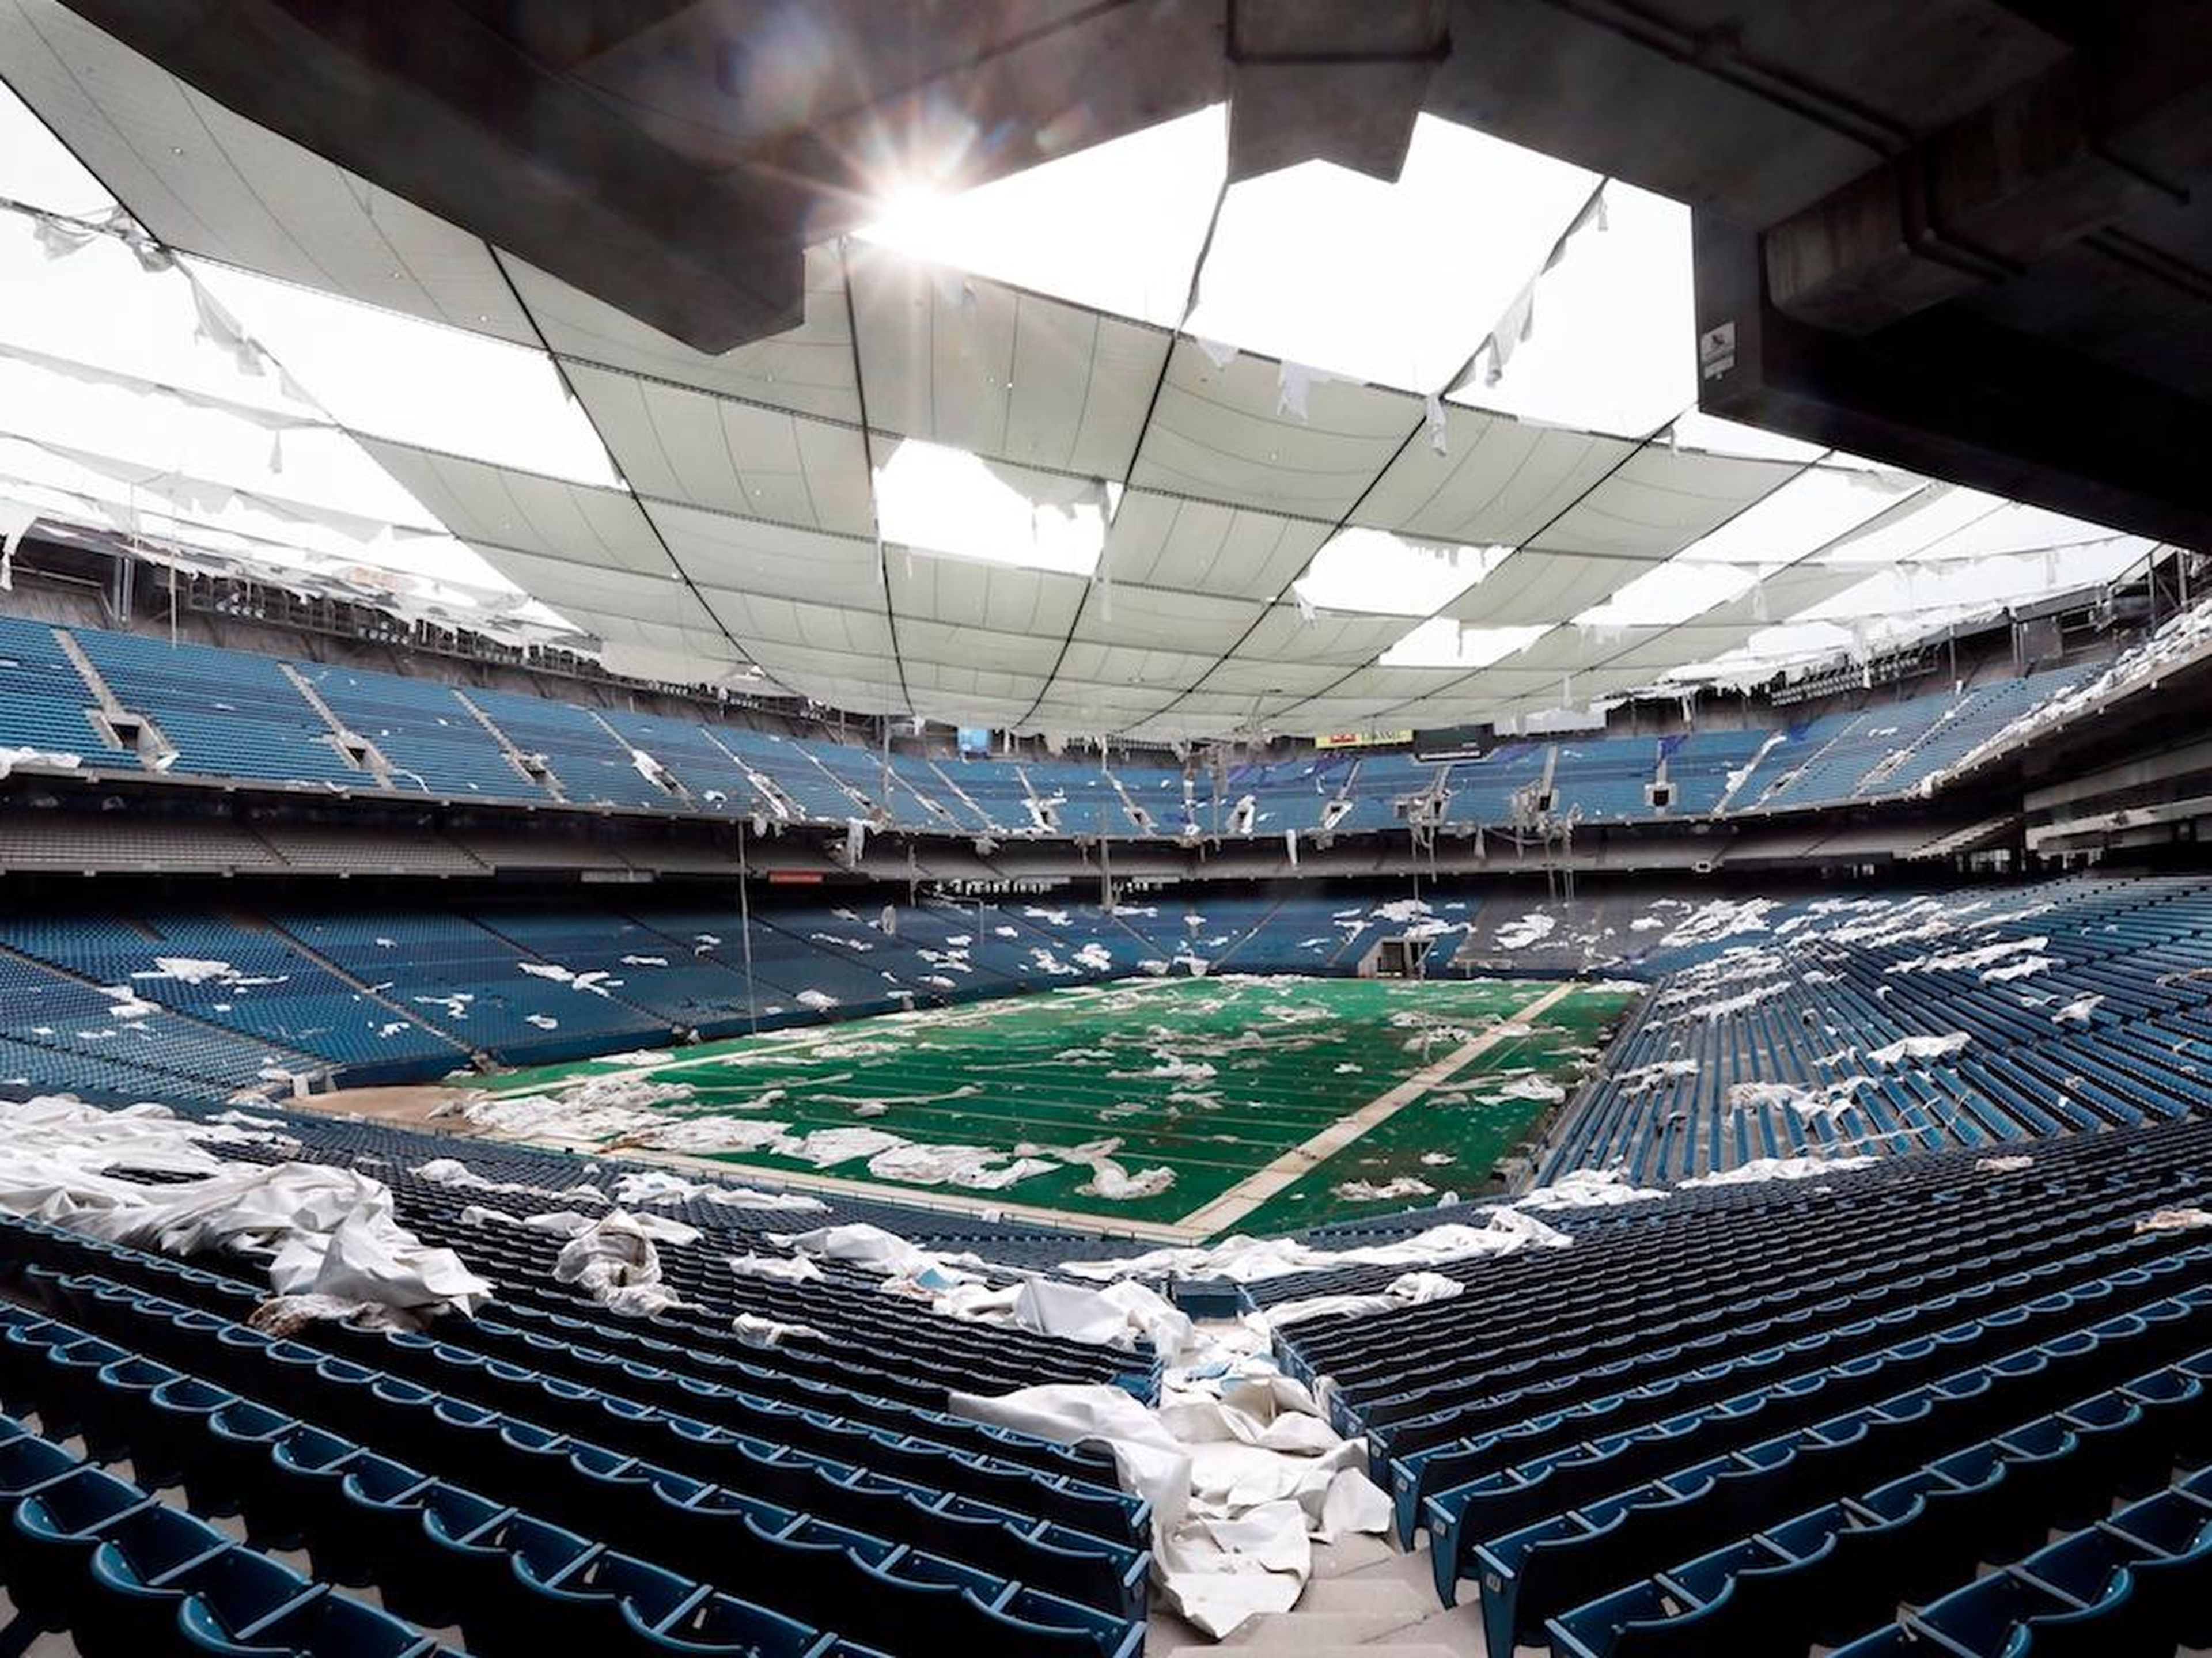 The Pontiac Silverdome once hosted the Super Dome.